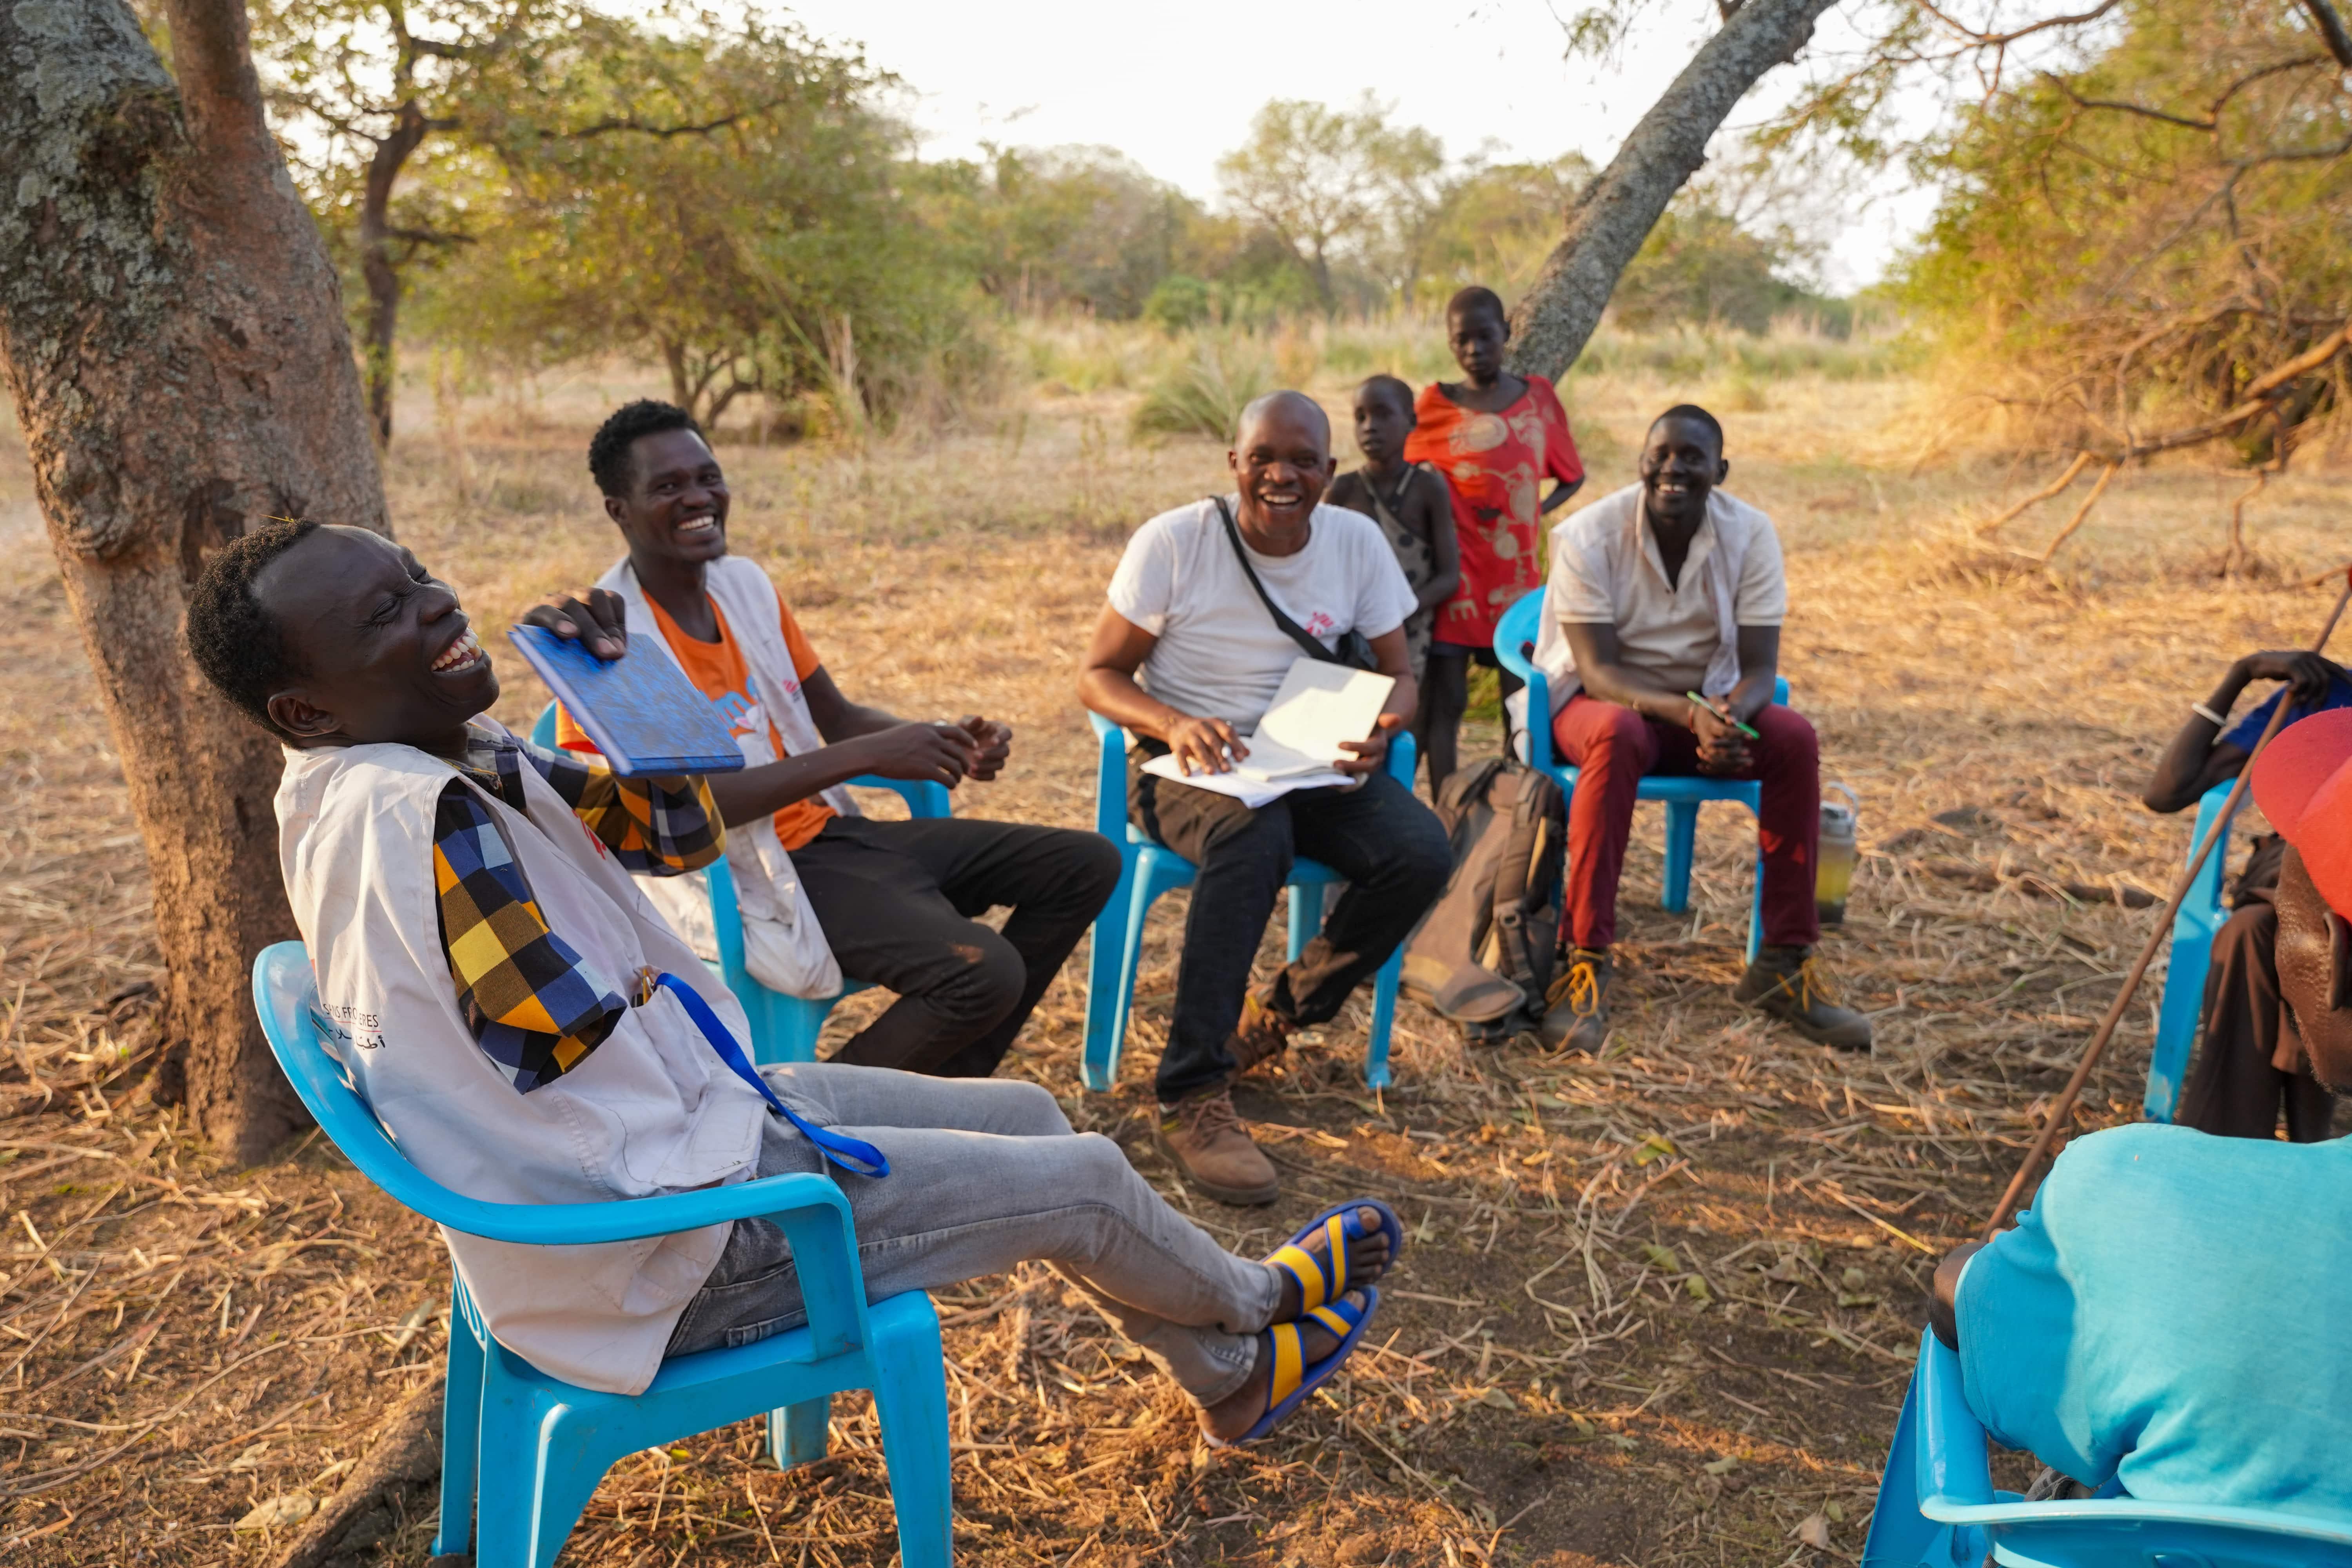 Cattle Keepers in South Sudan: MSF team gathers with local chiefs during a four-day outreach visit among cattle keepers in Labarab, Greater Pibor Administrative Area.